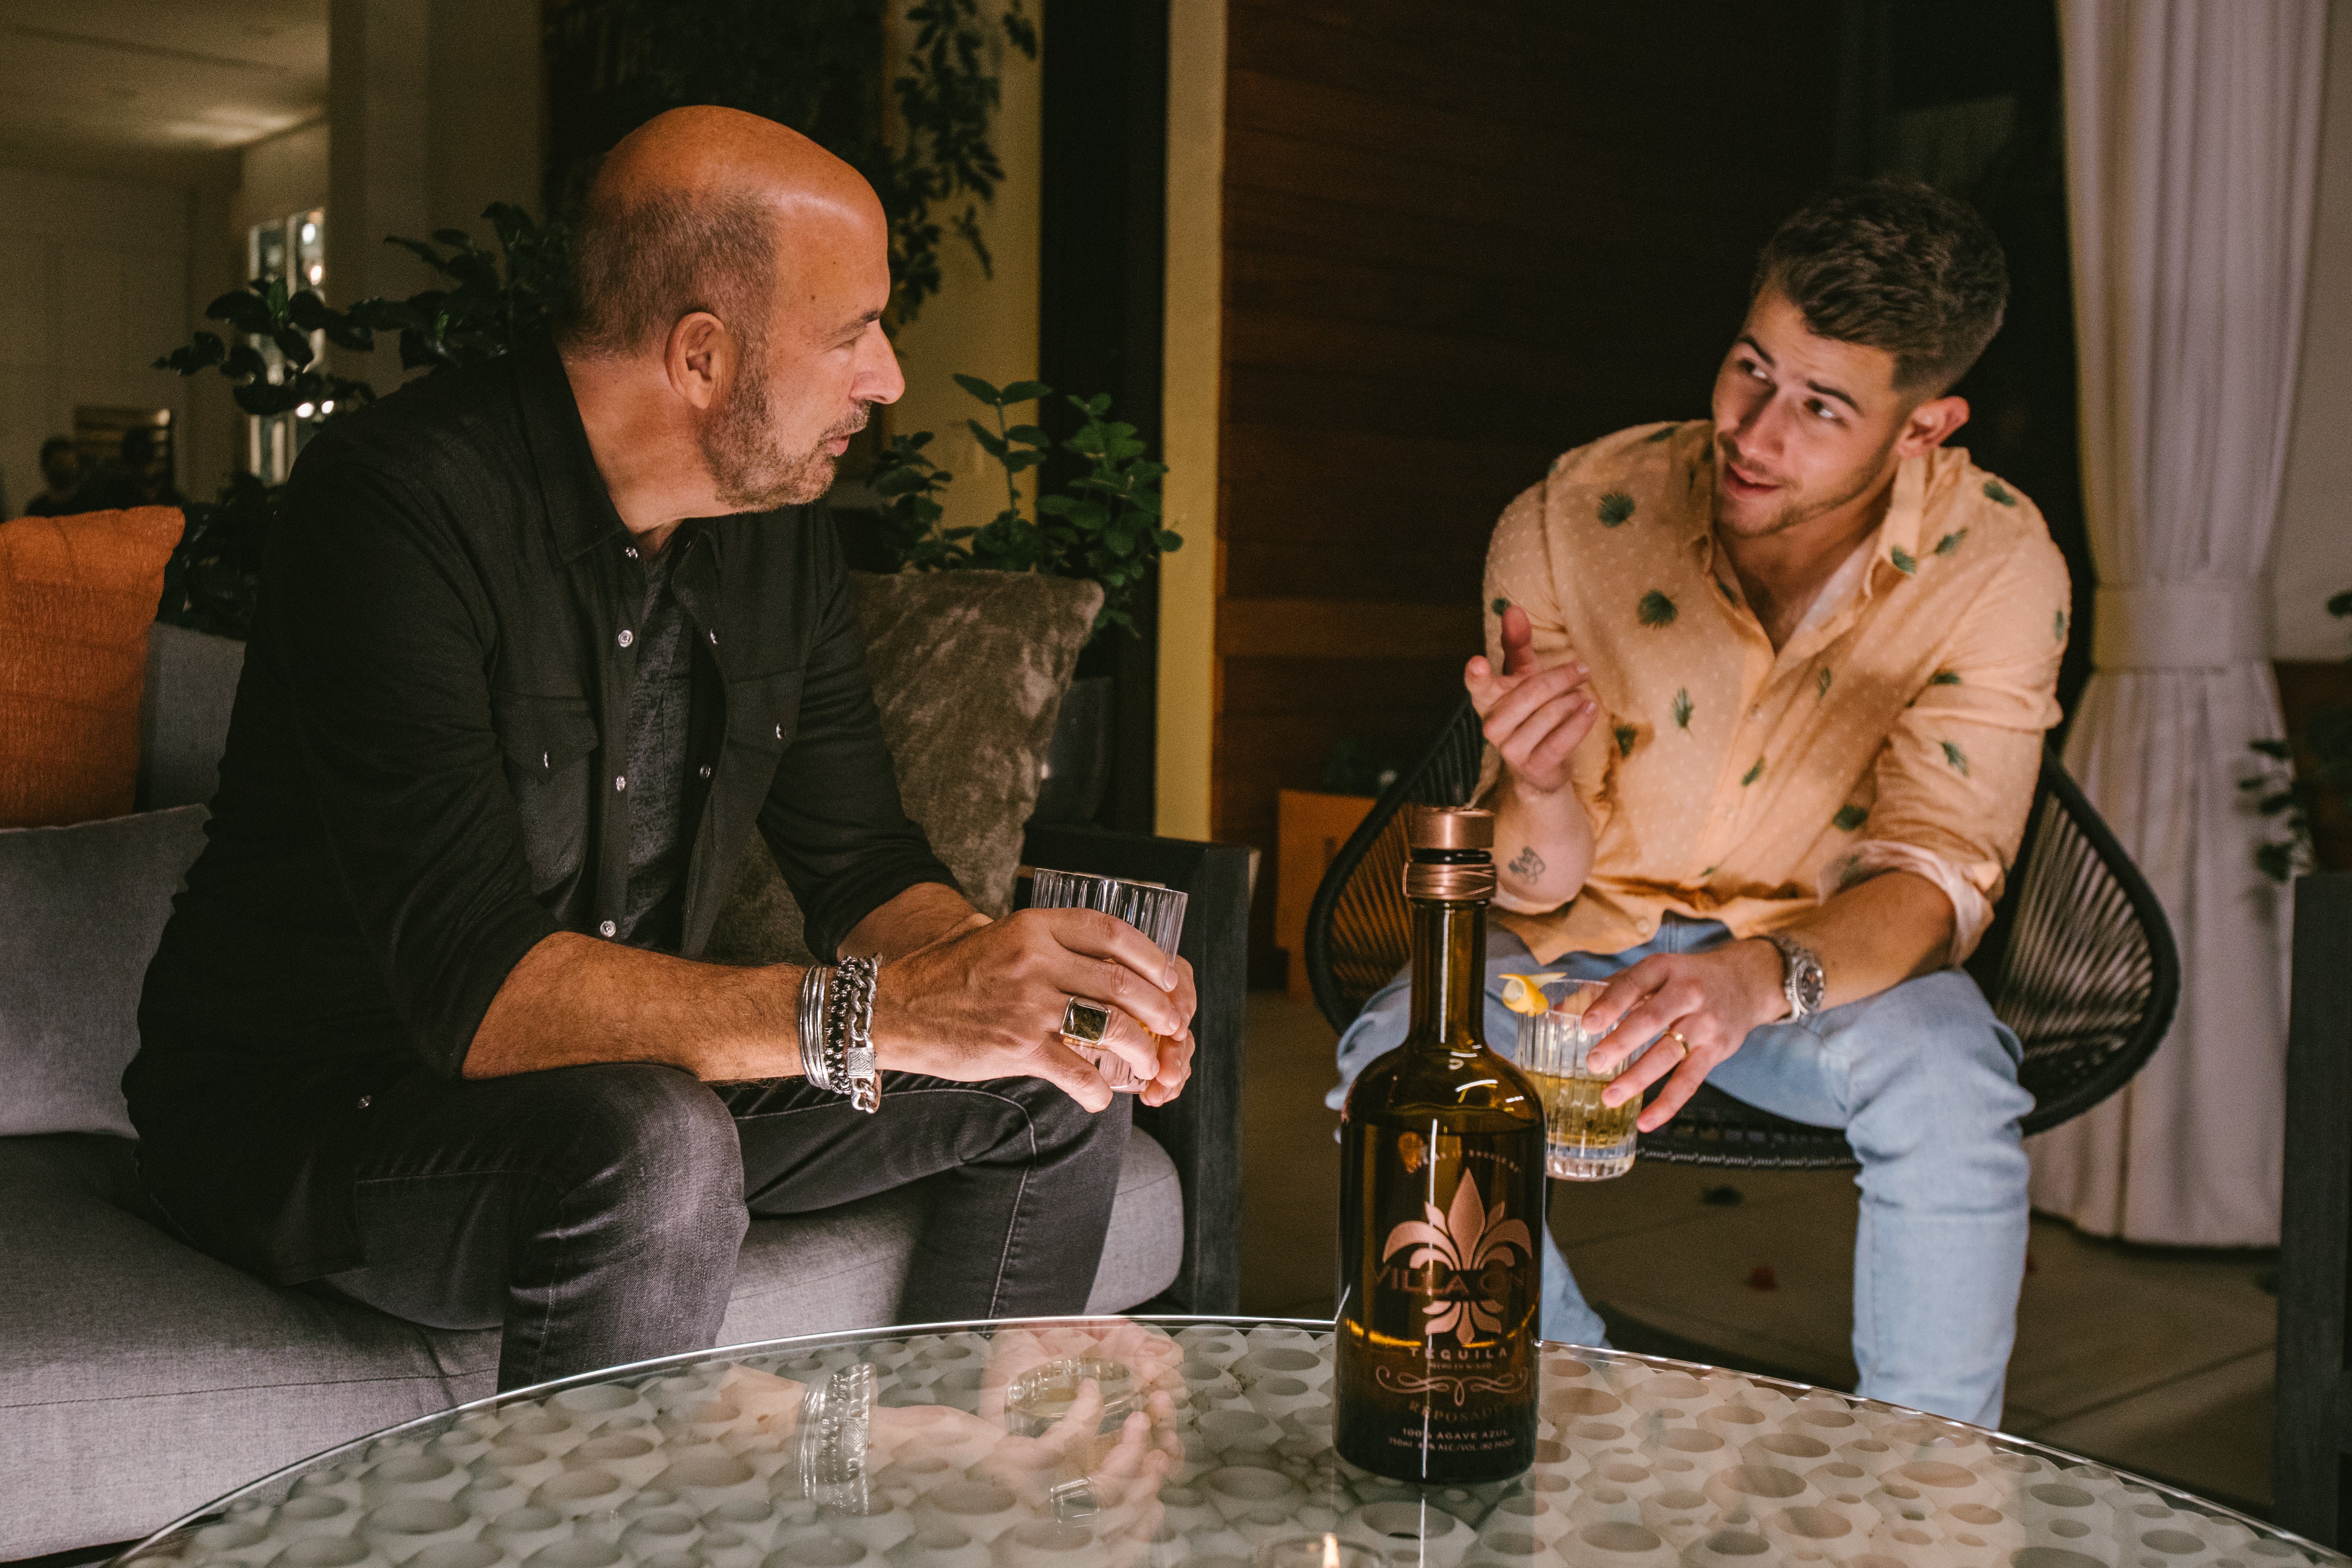 On a beach in Mexico, Nick Jonas and John Varvatos made a toast to 'Life As It Should Be'